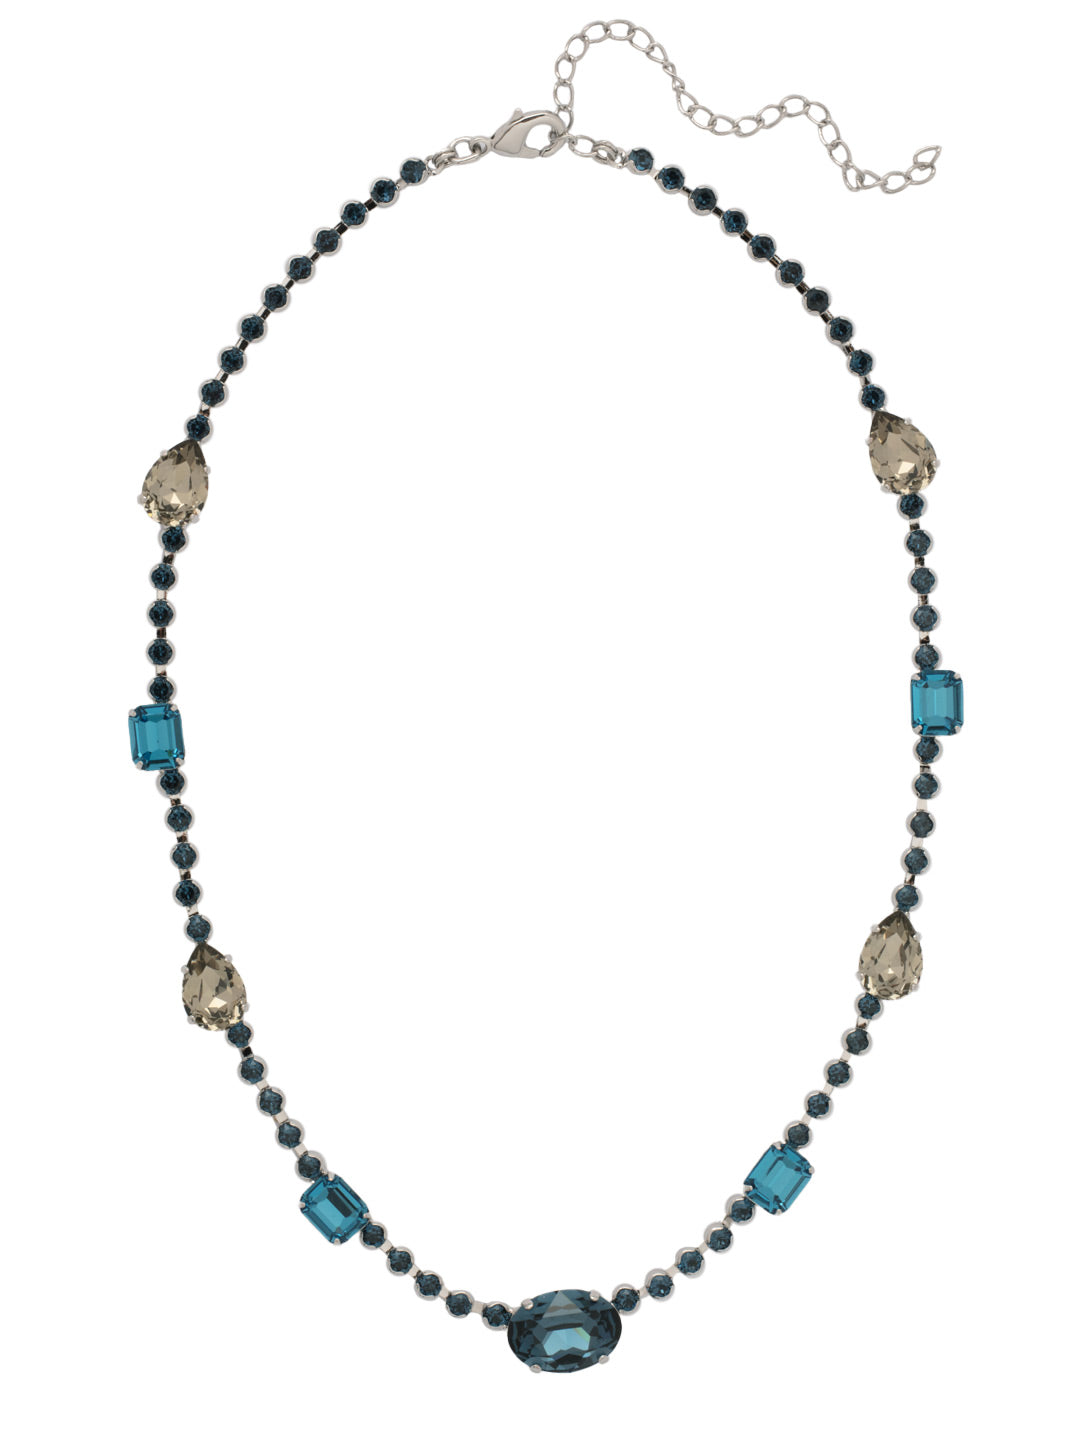 Grace Tennis Necklace - NFL99PDASP - <p>The Grace Tennis Necklace features alternating pear, emerald, and oval cut crystals on an adjustable rhinestone chain, secured with a lobster claw clasp. From Sorrelli's Aspen SKY collection in our Palladium finish.</p>